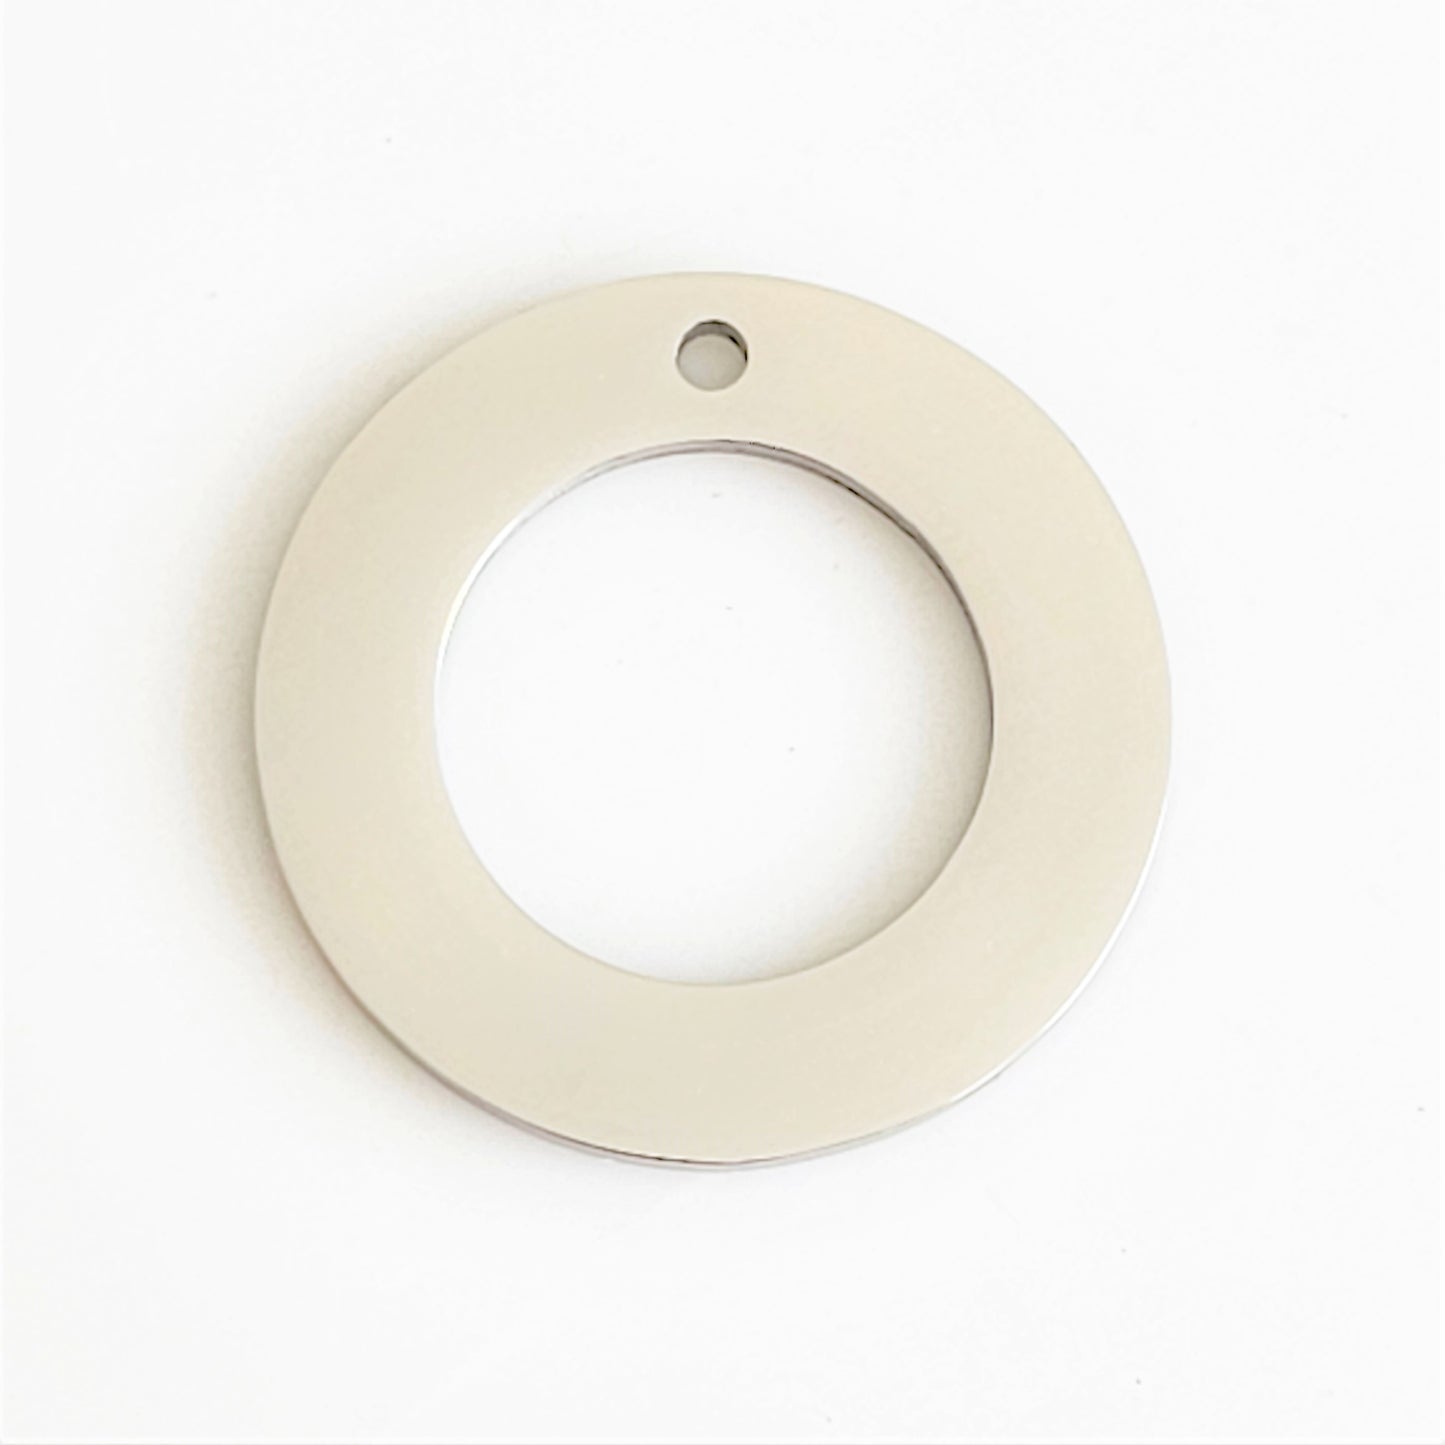 Stainless Steel - 1" Washer (with hole)